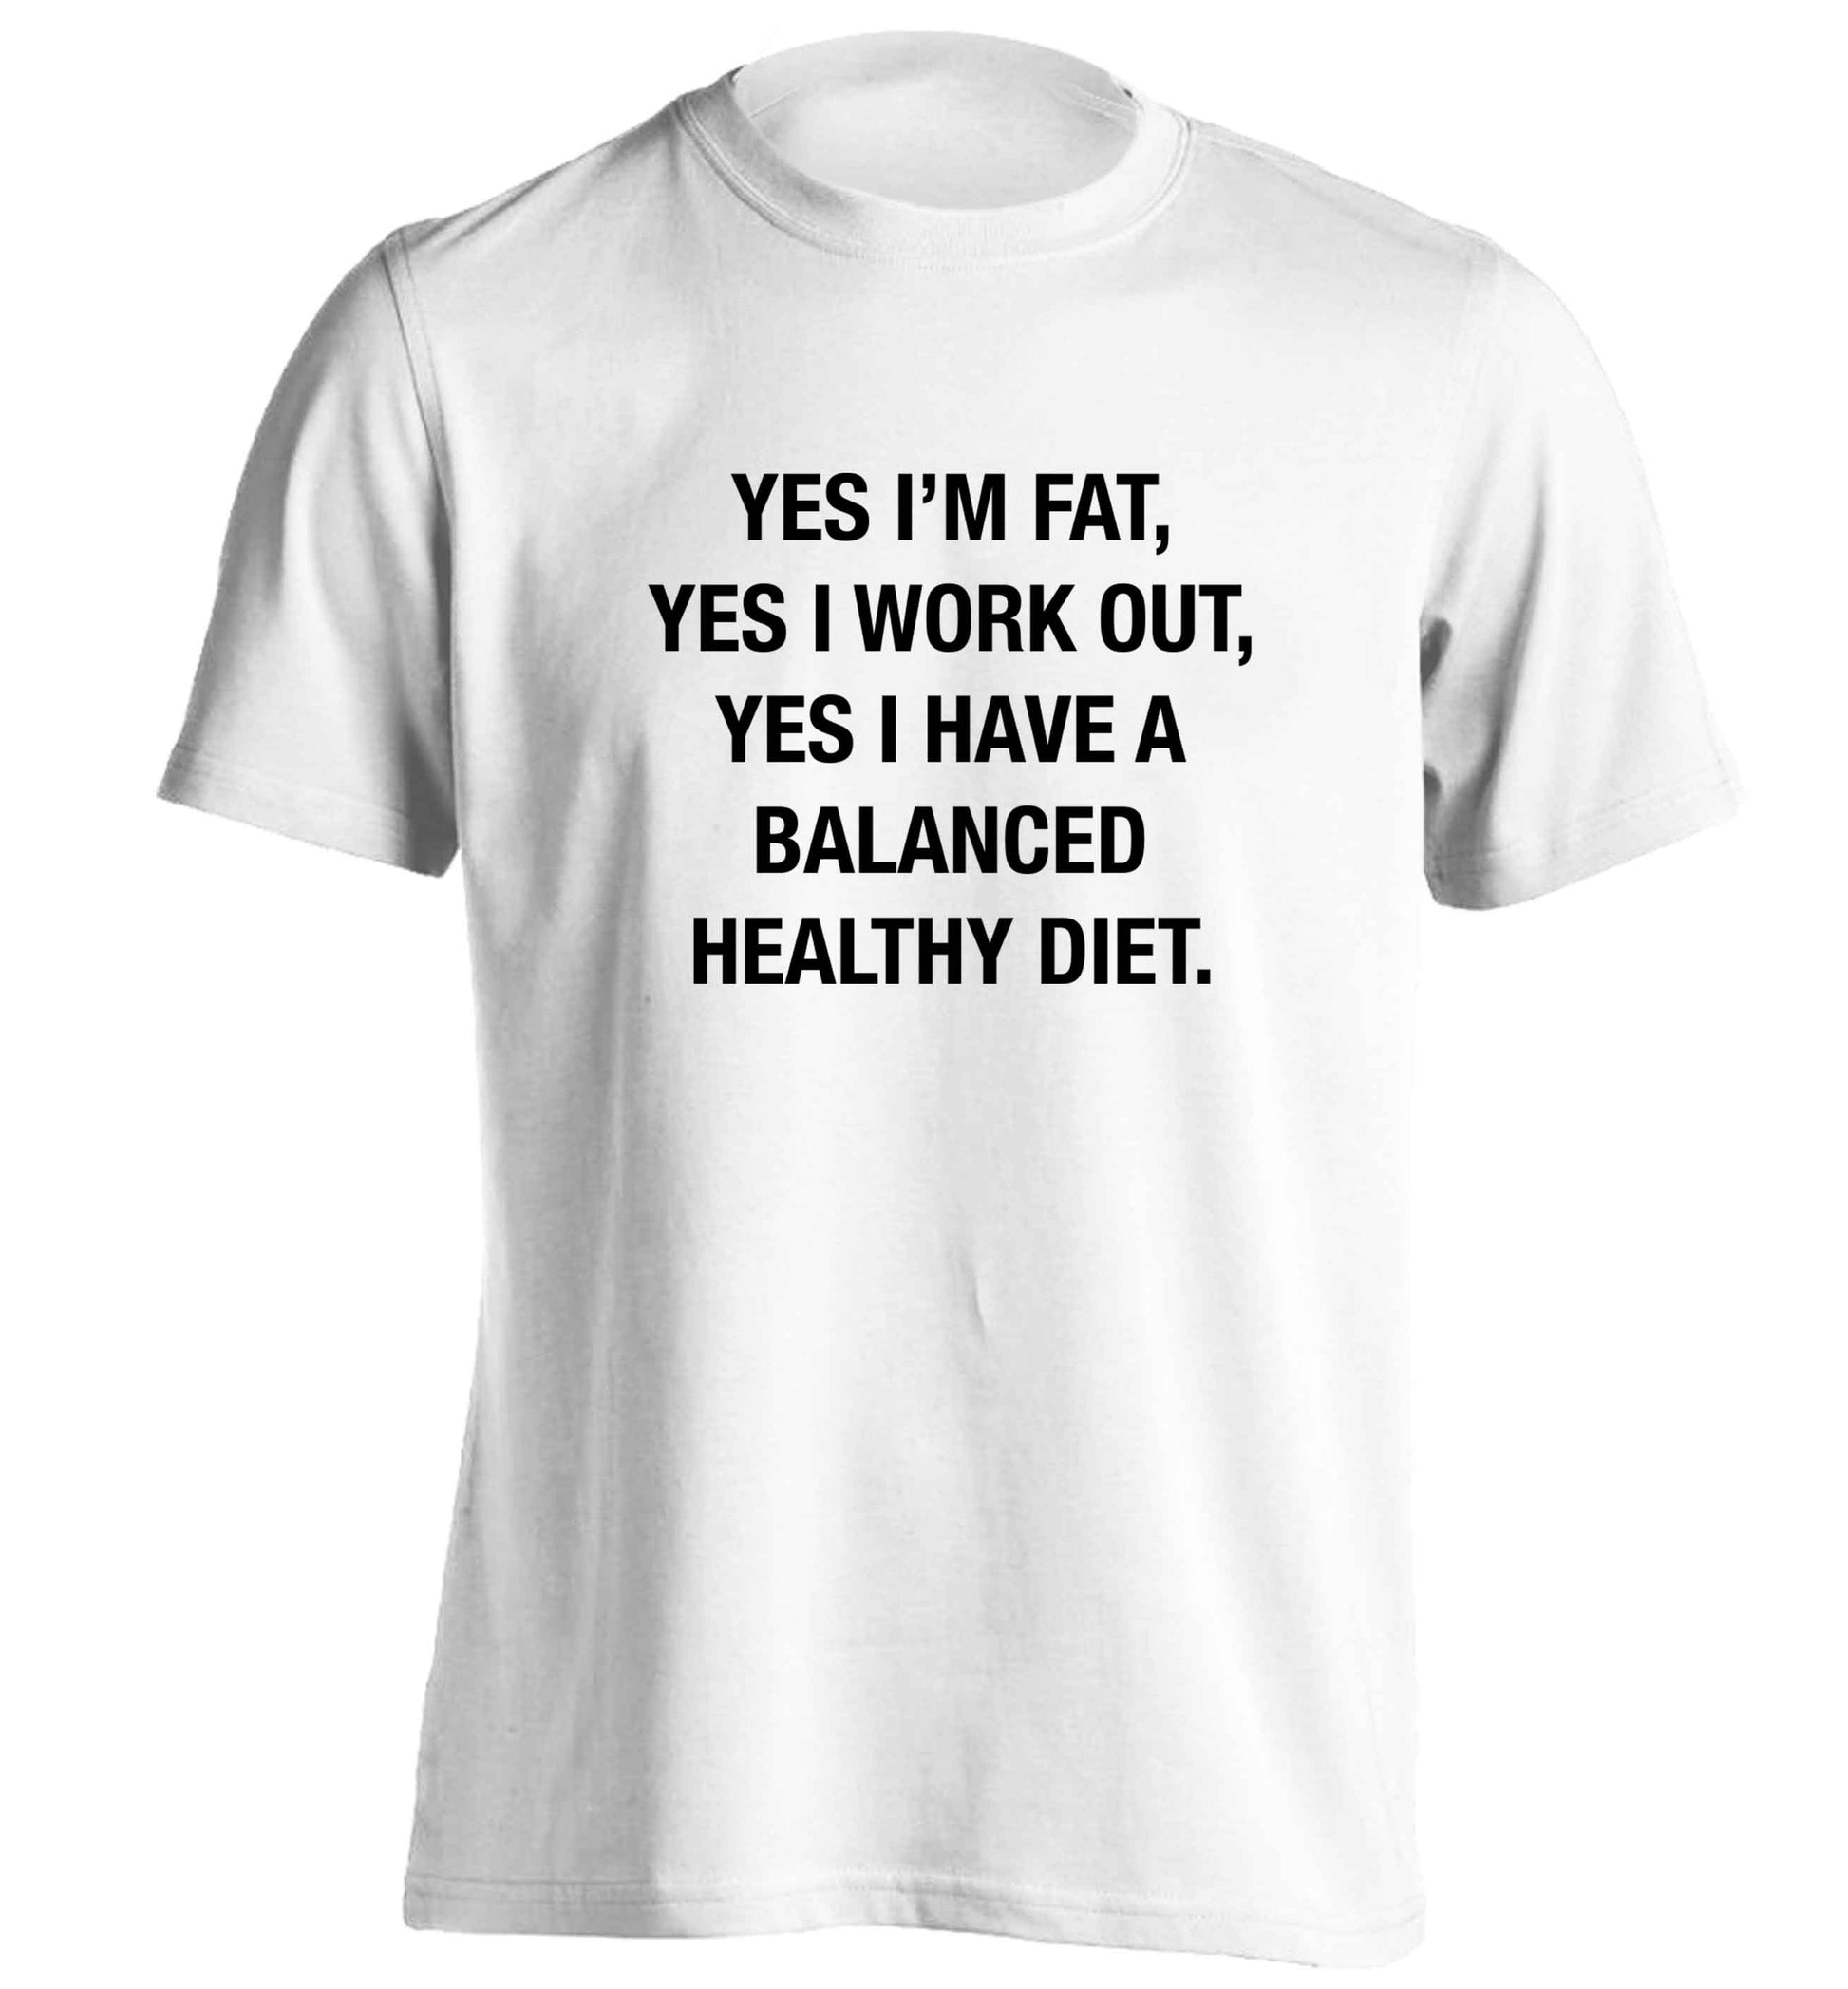 Yes I'm fat, yes I work out, yes I have a balanced healthy diet adults unisex white Tshirt 2XL